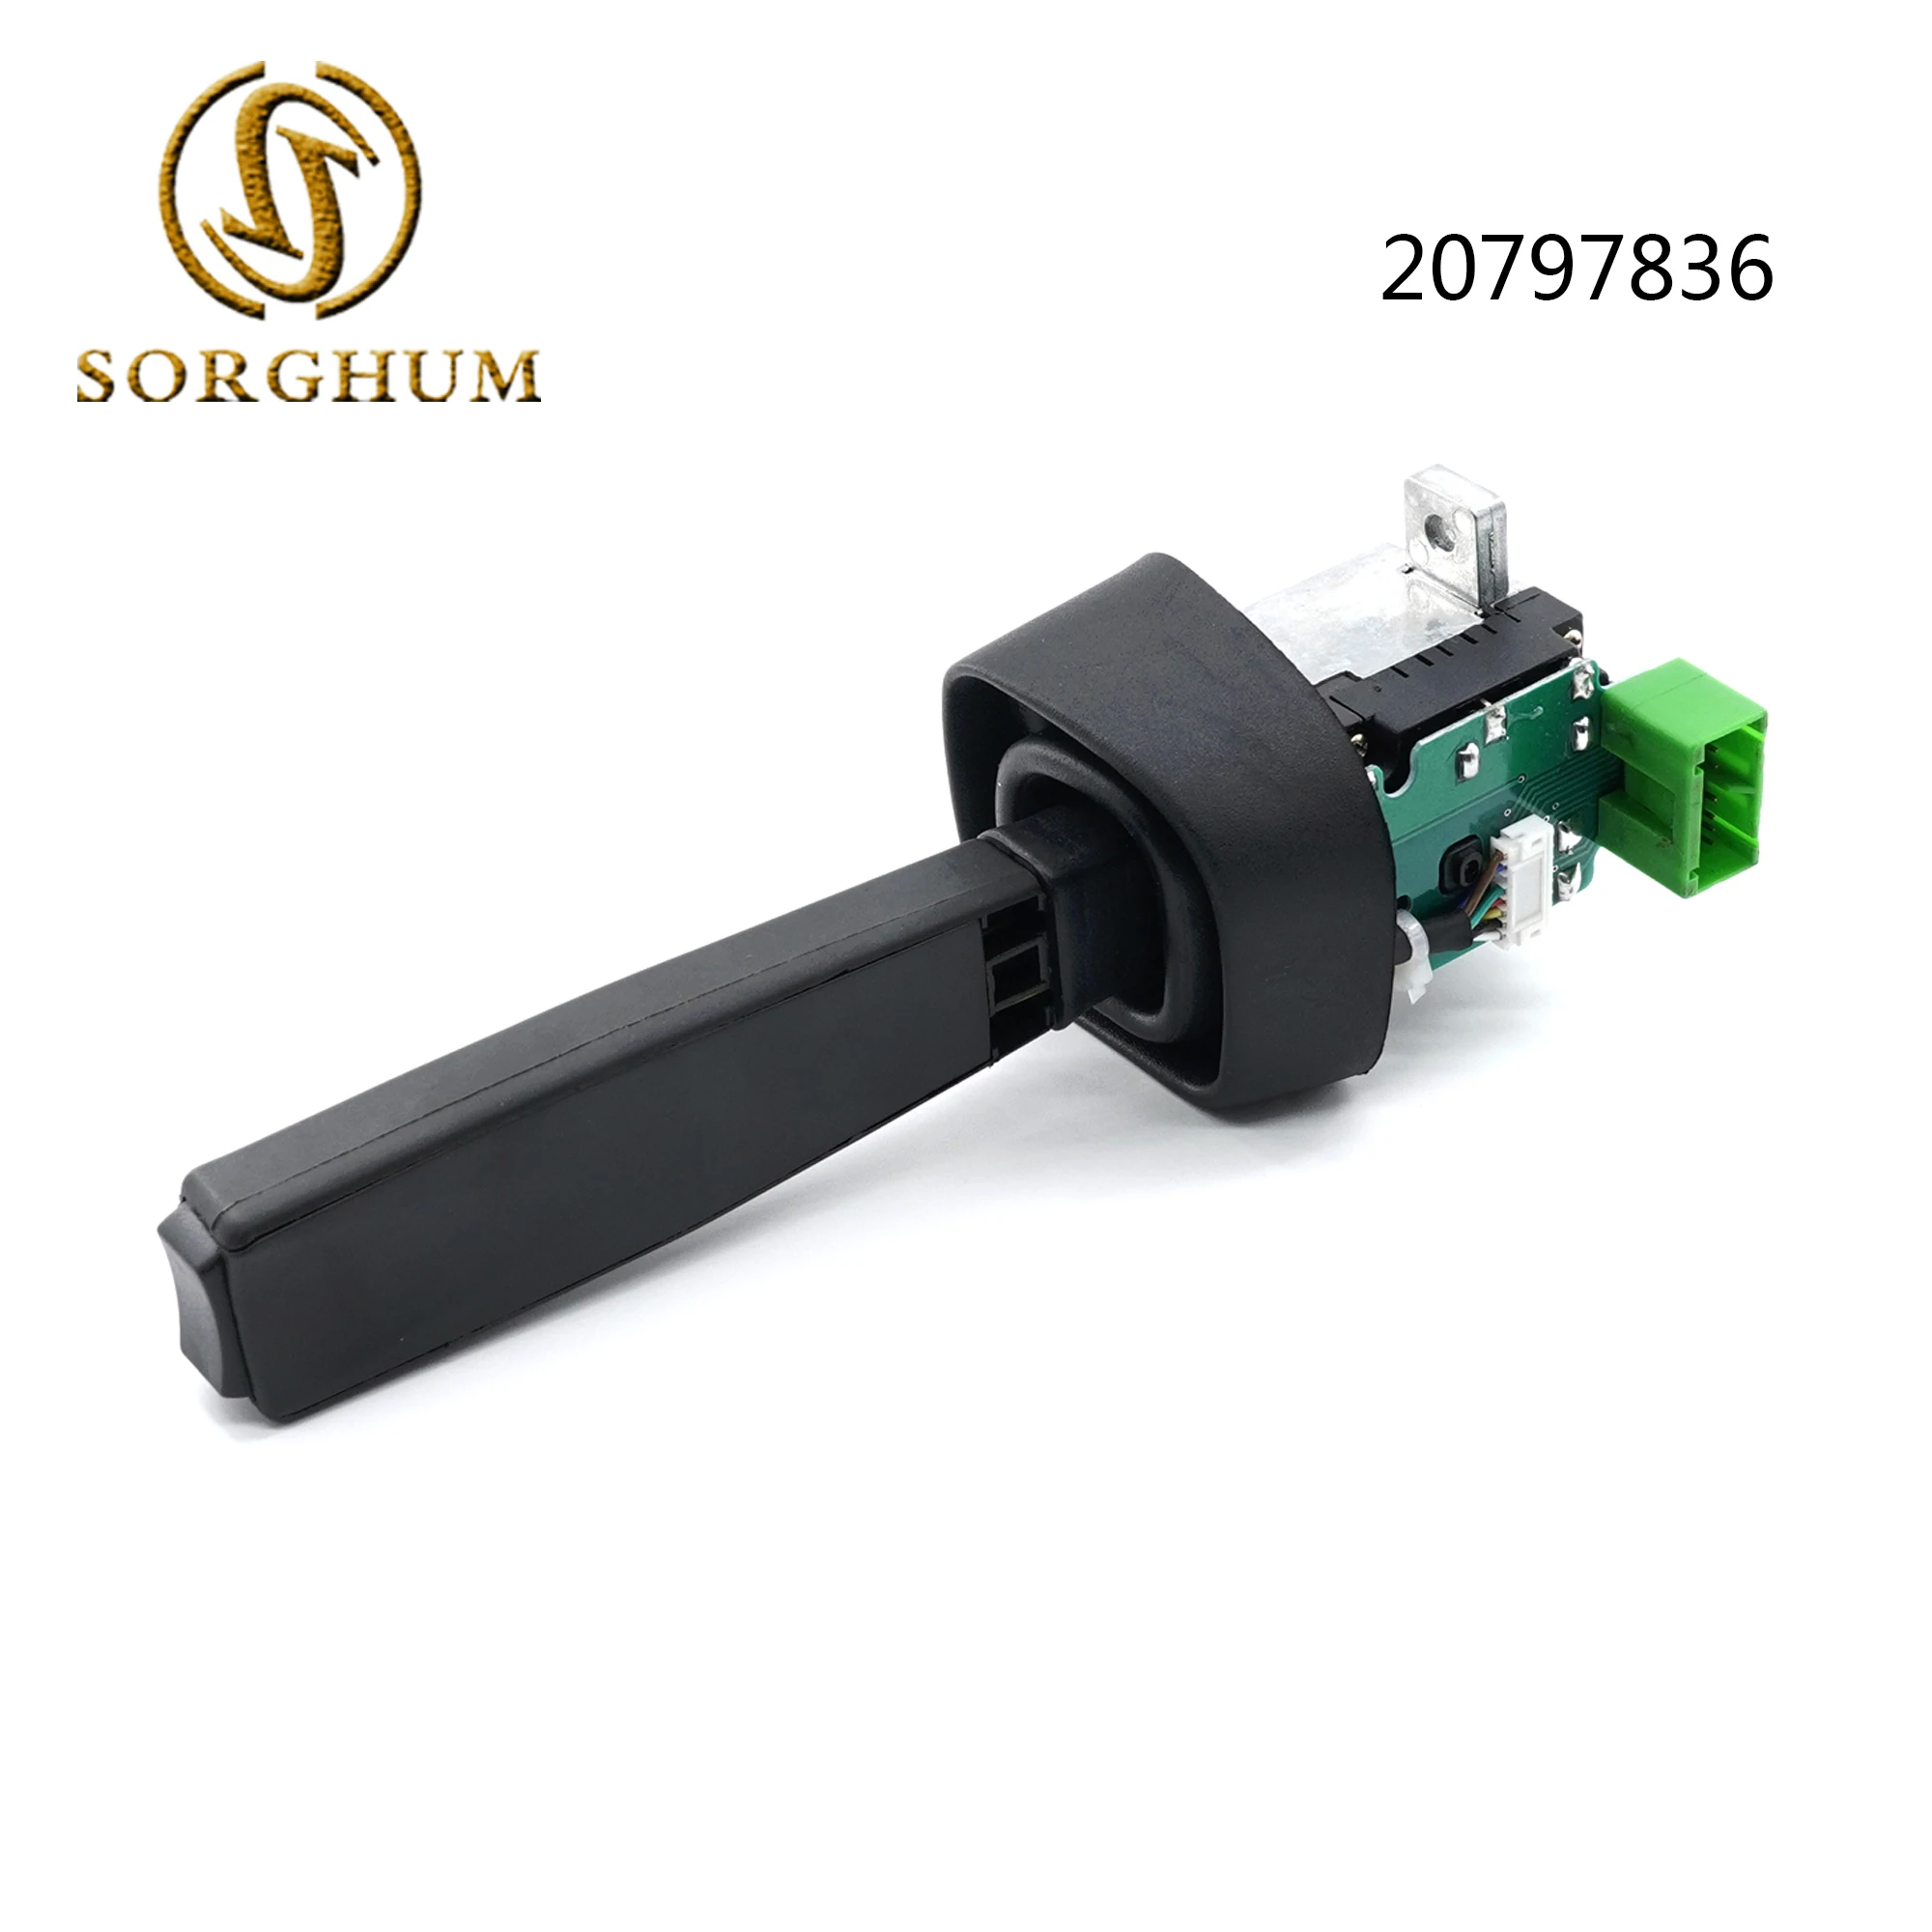 

SORGHUM Steering Column Switch Combination Switches 20797836 For Volvo FH12 FM 20701028 21670857 20701049 70351744 20399170